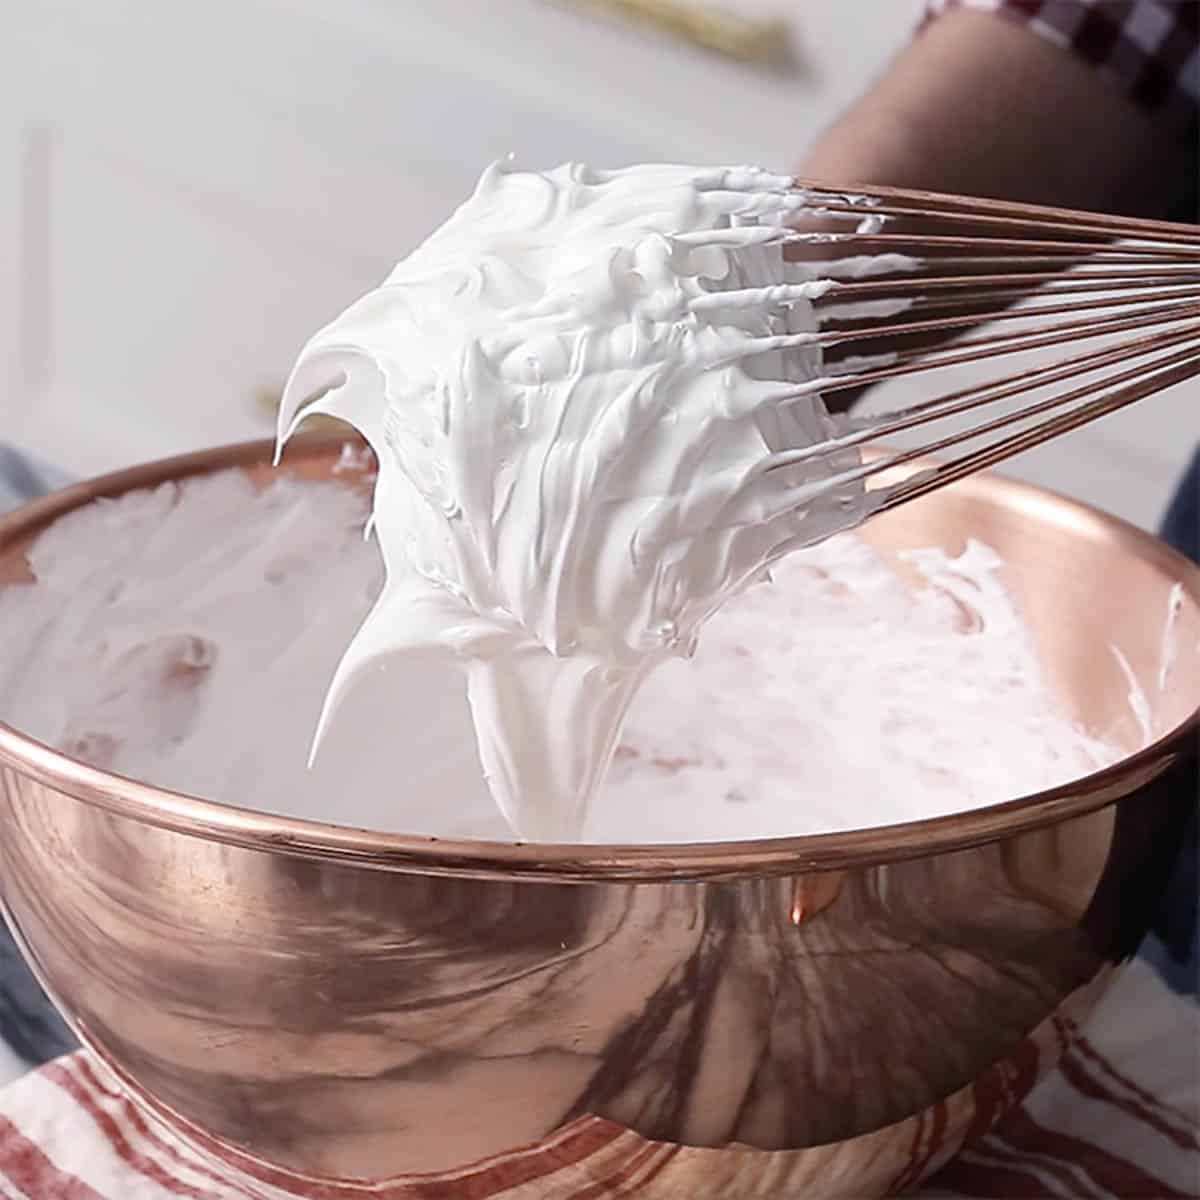 Meringue whipped to stiff peaks in a copper bowl.